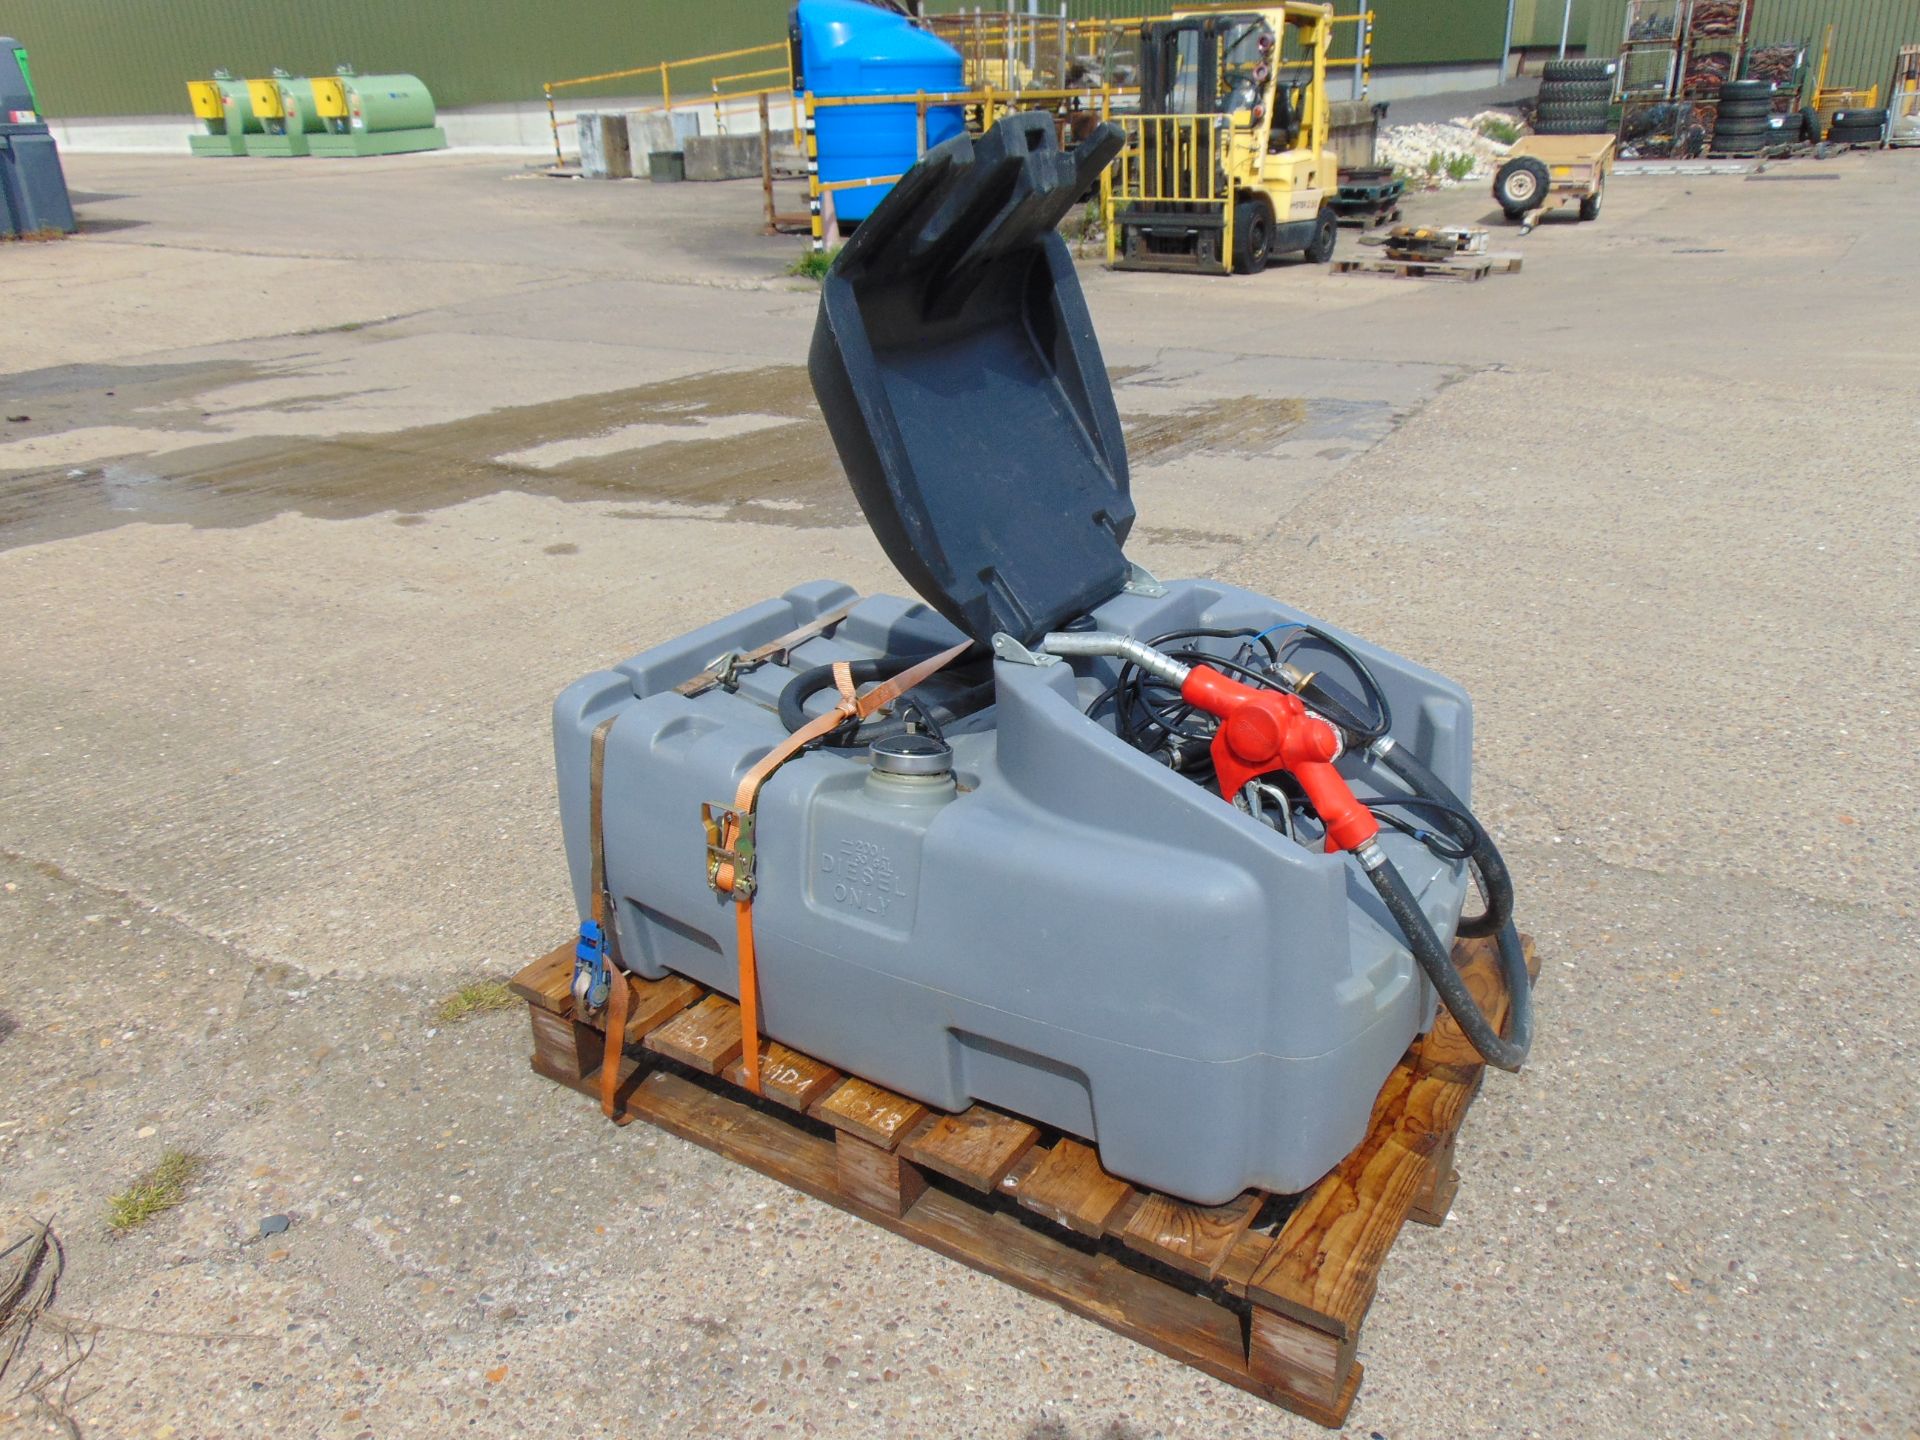 Selecta 200 Litre 50 Gall Portable Refuel Tank c/w 12Volt Pump Hose and Automatic Refuelling Nozzle - Image 8 of 14